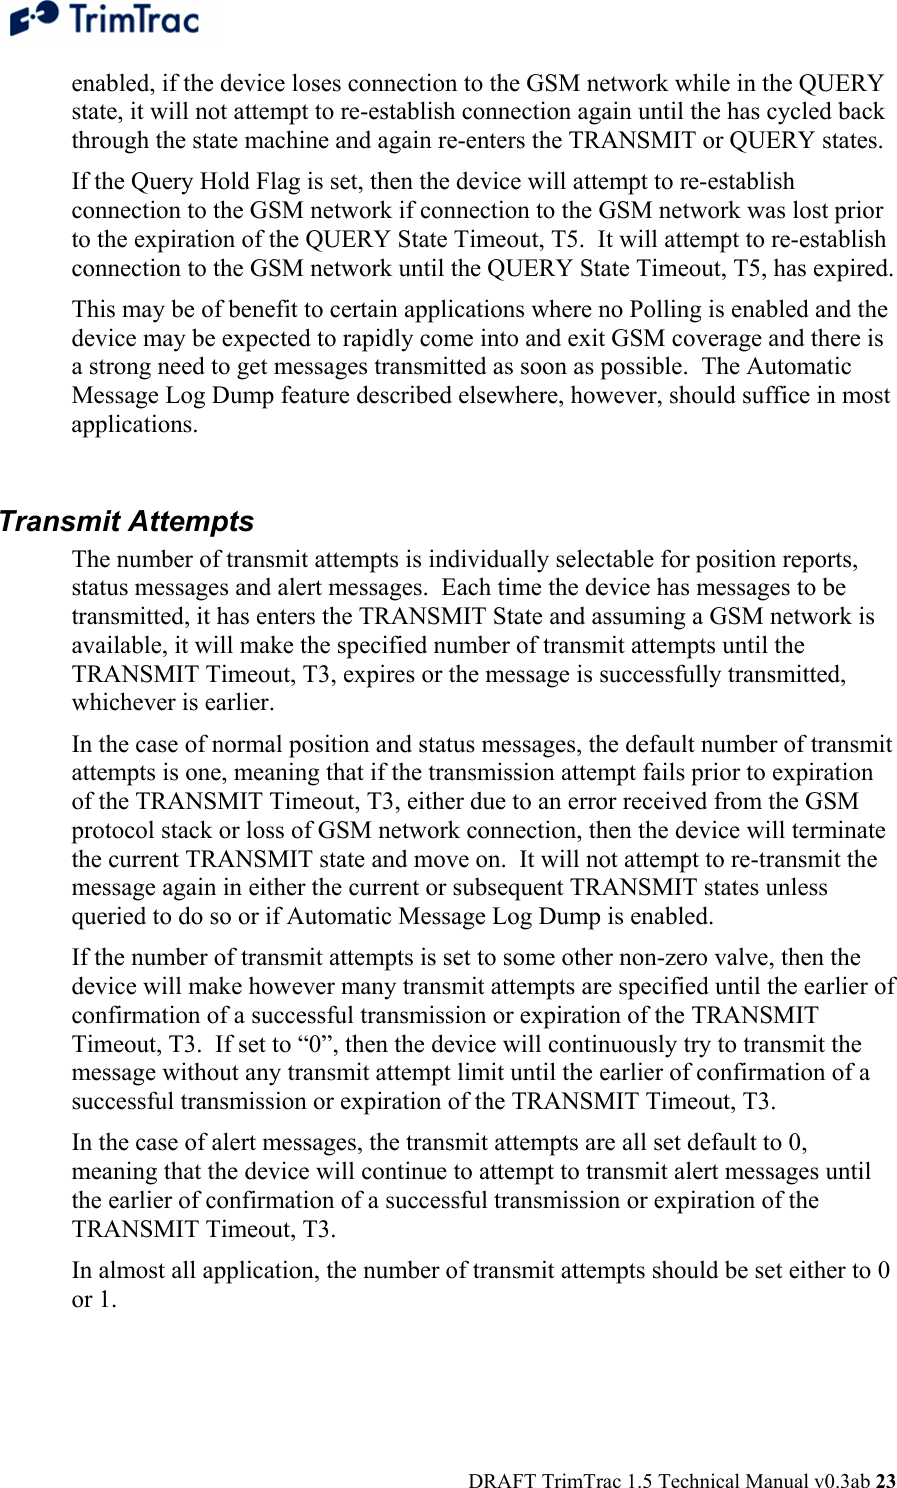  DRAFT TrimTrac 1.5 Technical Manual v0.3ab 23 enabled, if the device loses connection to the GSM network while in the QUERY state, it will not attempt to re-establish connection again until the has cycled back through the state machine and again re-enters the TRANSMIT or QUERY states. If the Query Hold Flag is set, then the device will attempt to re-establish connection to the GSM network if connection to the GSM network was lost prior to the expiration of the QUERY State Timeout, T5.  It will attempt to re-establish connection to the GSM network until the QUERY State Timeout, T5, has expired. This may be of benefit to certain applications where no Polling is enabled and the device may be expected to rapidly come into and exit GSM coverage and there is a strong need to get messages transmitted as soon as possible.  The Automatic Message Log Dump feature described elsewhere, however, should suffice in most applications.  Transmit Attempts The number of transmit attempts is individually selectable for position reports, status messages and alert messages.  Each time the device has messages to be transmitted, it has enters the TRANSMIT State and assuming a GSM network is available, it will make the specified number of transmit attempts until the TRANSMIT Timeout, T3, expires or the message is successfully transmitted, whichever is earlier.   In the case of normal position and status messages, the default number of transmit attempts is one, meaning that if the transmission attempt fails prior to expiration of the TRANSMIT Timeout, T3, either due to an error received from the GSM protocol stack or loss of GSM network connection, then the device will terminate the current TRANSMIT state and move on.  It will not attempt to re-transmit the message again in either the current or subsequent TRANSMIT states unless queried to do so or if Automatic Message Log Dump is enabled.   If the number of transmit attempts is set to some other non-zero valve, then the device will make however many transmit attempts are specified until the earlier of confirmation of a successful transmission or expiration of the TRANSMIT Timeout, T3.  If set to “0”, then the device will continuously try to transmit the message without any transmit attempt limit until the earlier of confirmation of a successful transmission or expiration of the TRANSMIT Timeout, T3. In the case of alert messages, the transmit attempts are all set default to 0, meaning that the device will continue to attempt to transmit alert messages until the earlier of confirmation of a successful transmission or expiration of the TRANSMIT Timeout, T3. In almost all application, the number of transmit attempts should be set either to 0 or 1.  